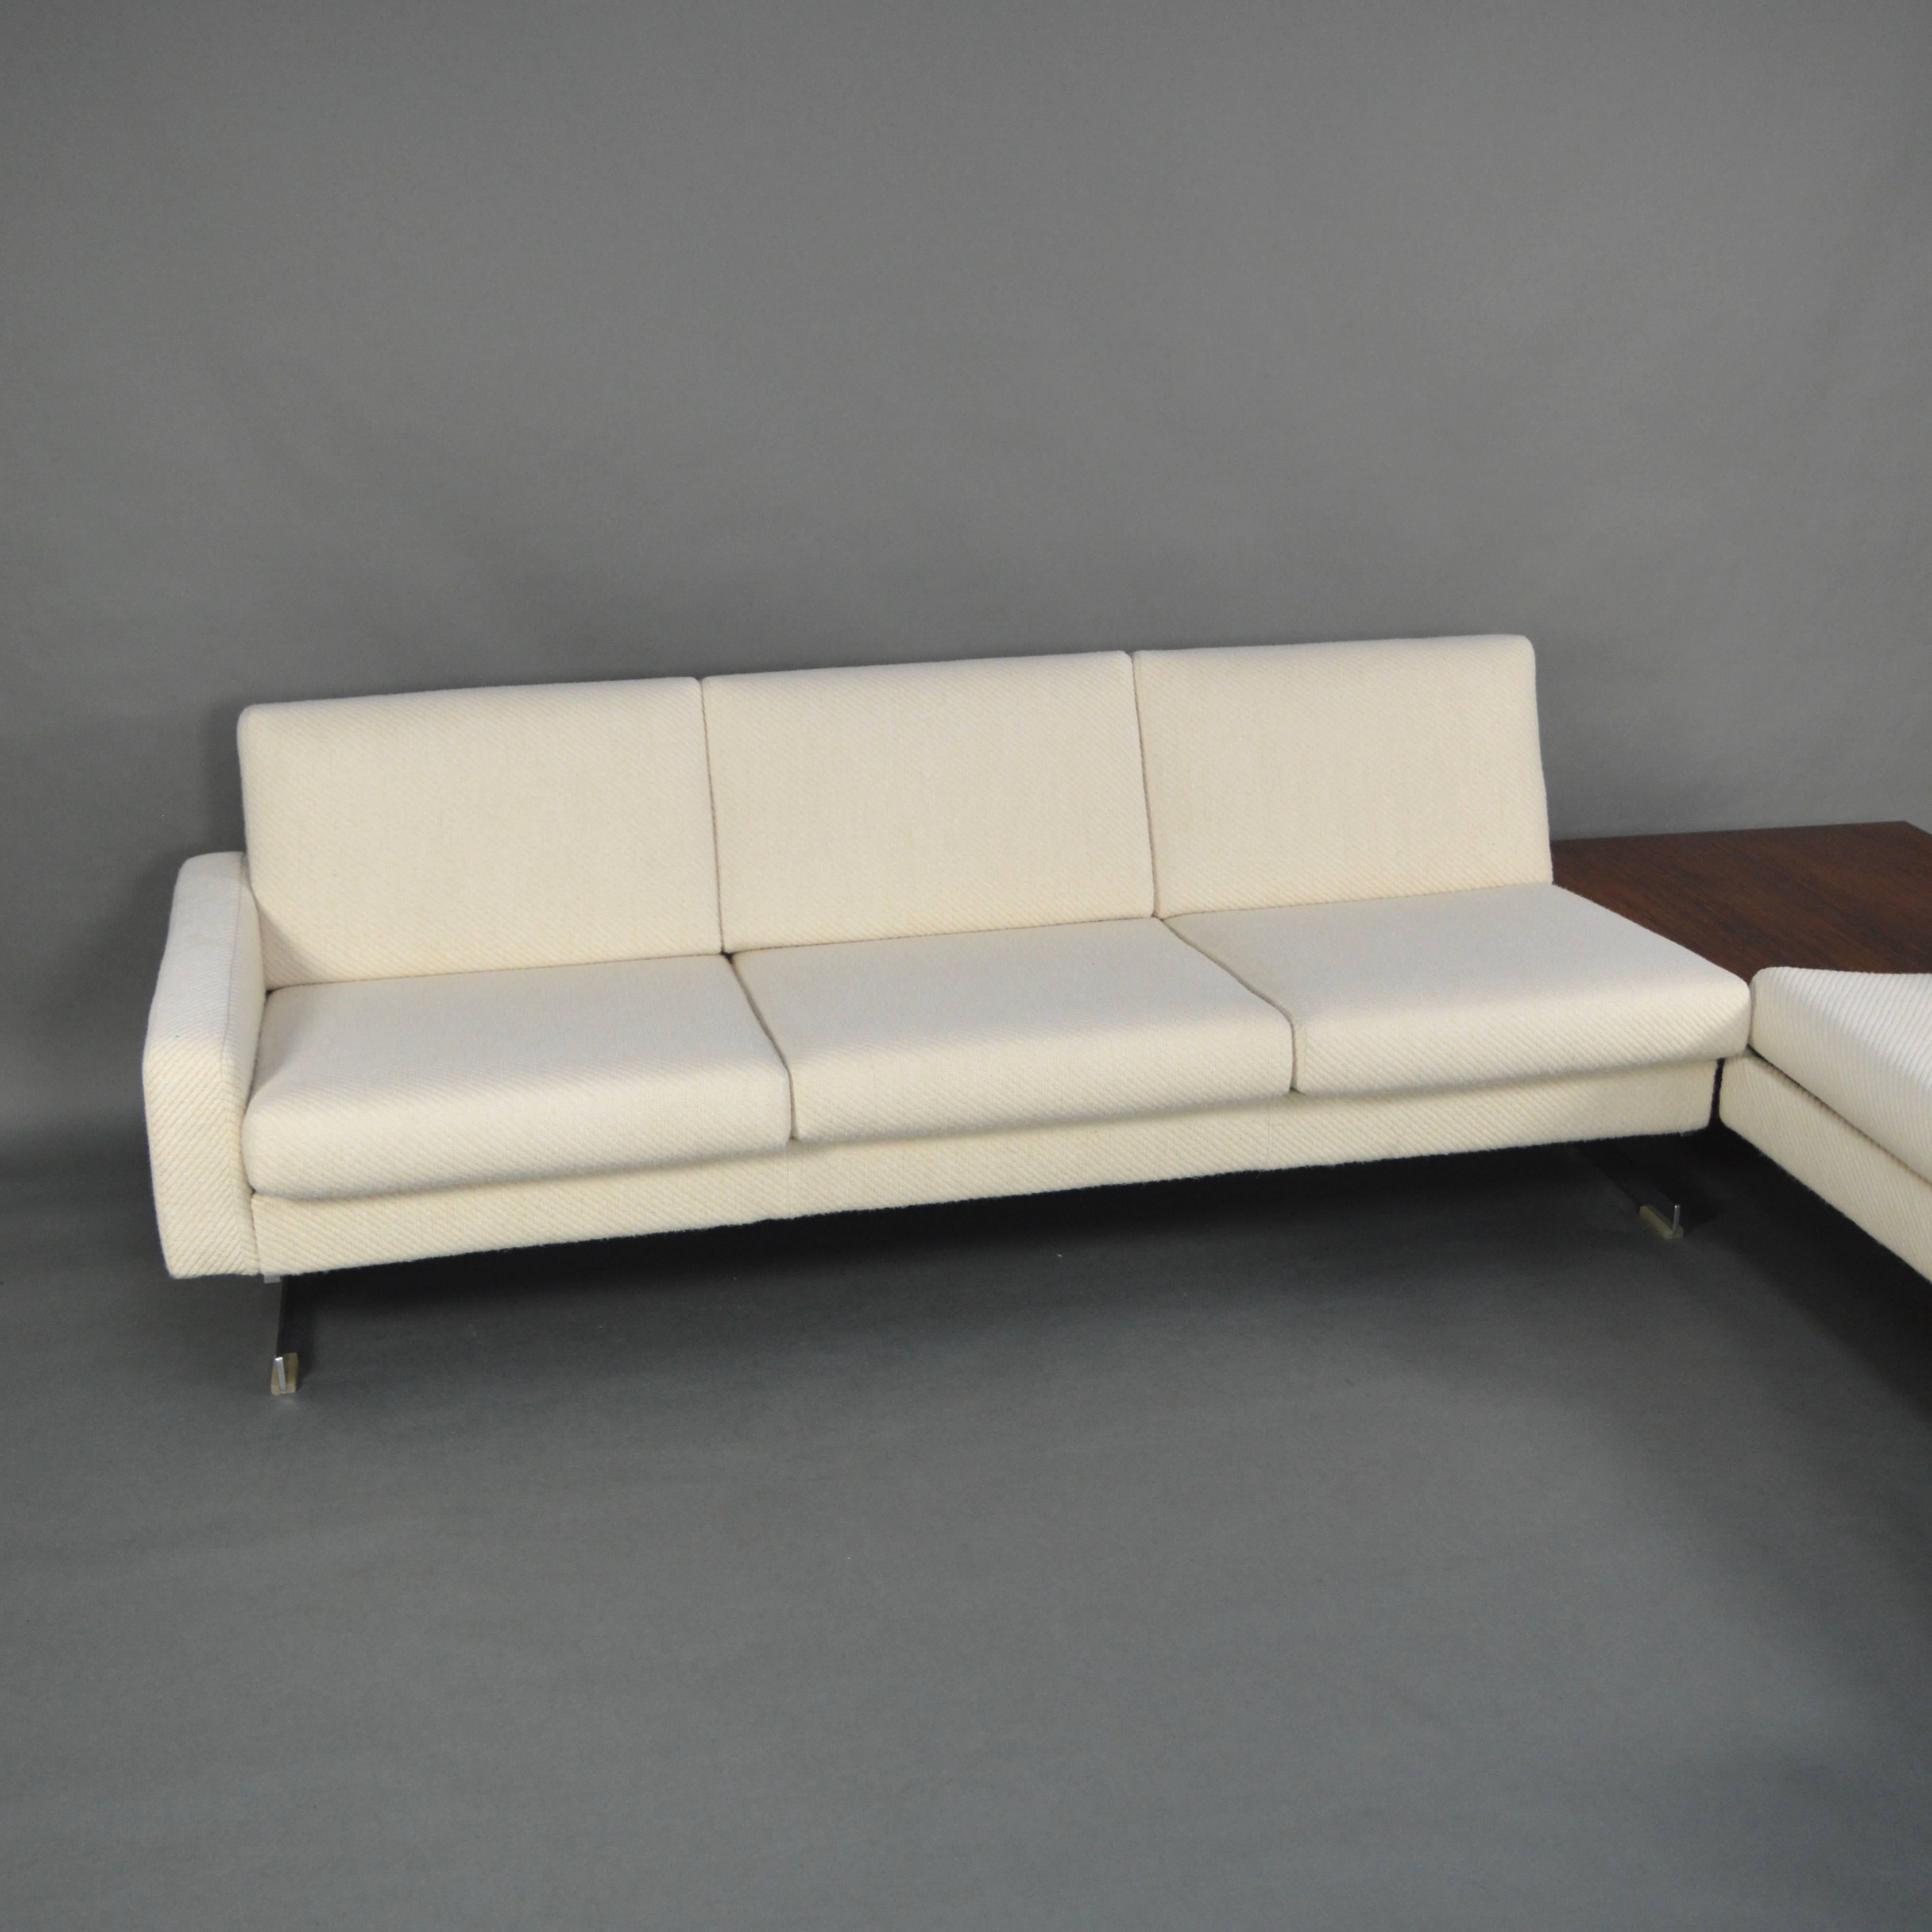 Rolf Benz 1st Edition Pluraform Sofa with Rosewood Coffee Tables, 1964 1